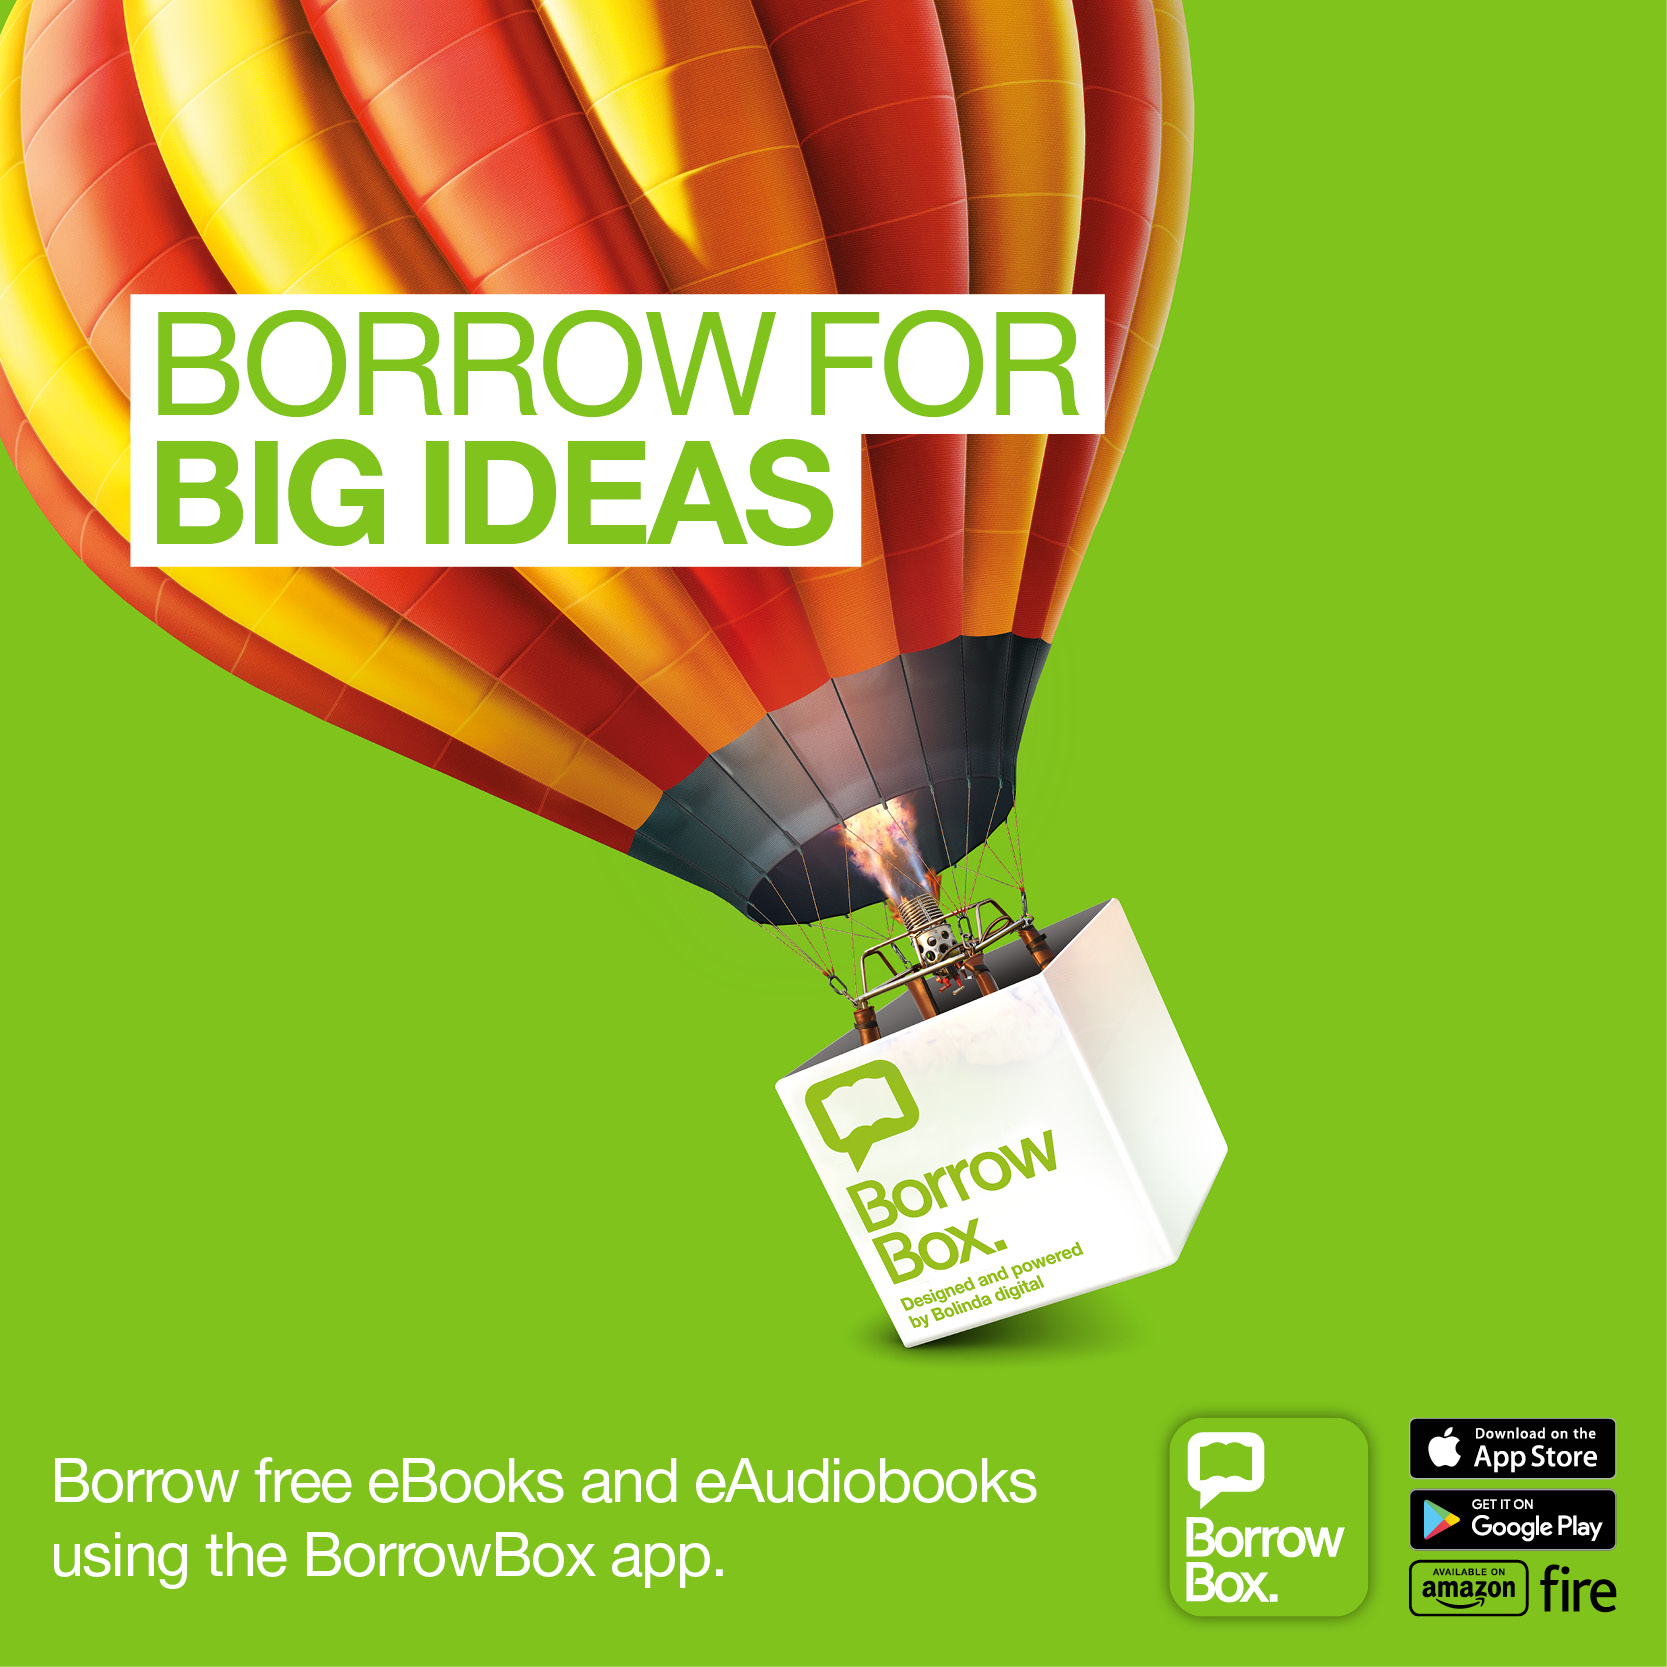 Green square with a hot air balloon on it, the basket of the balloon has the logo for BorrowBox. Text at the bottom reads "Borrow free eBooks and eAudiobooks using the Borrowbox app".  Bottom right corner has logos for Borrowbox, also for Apple Appstore G